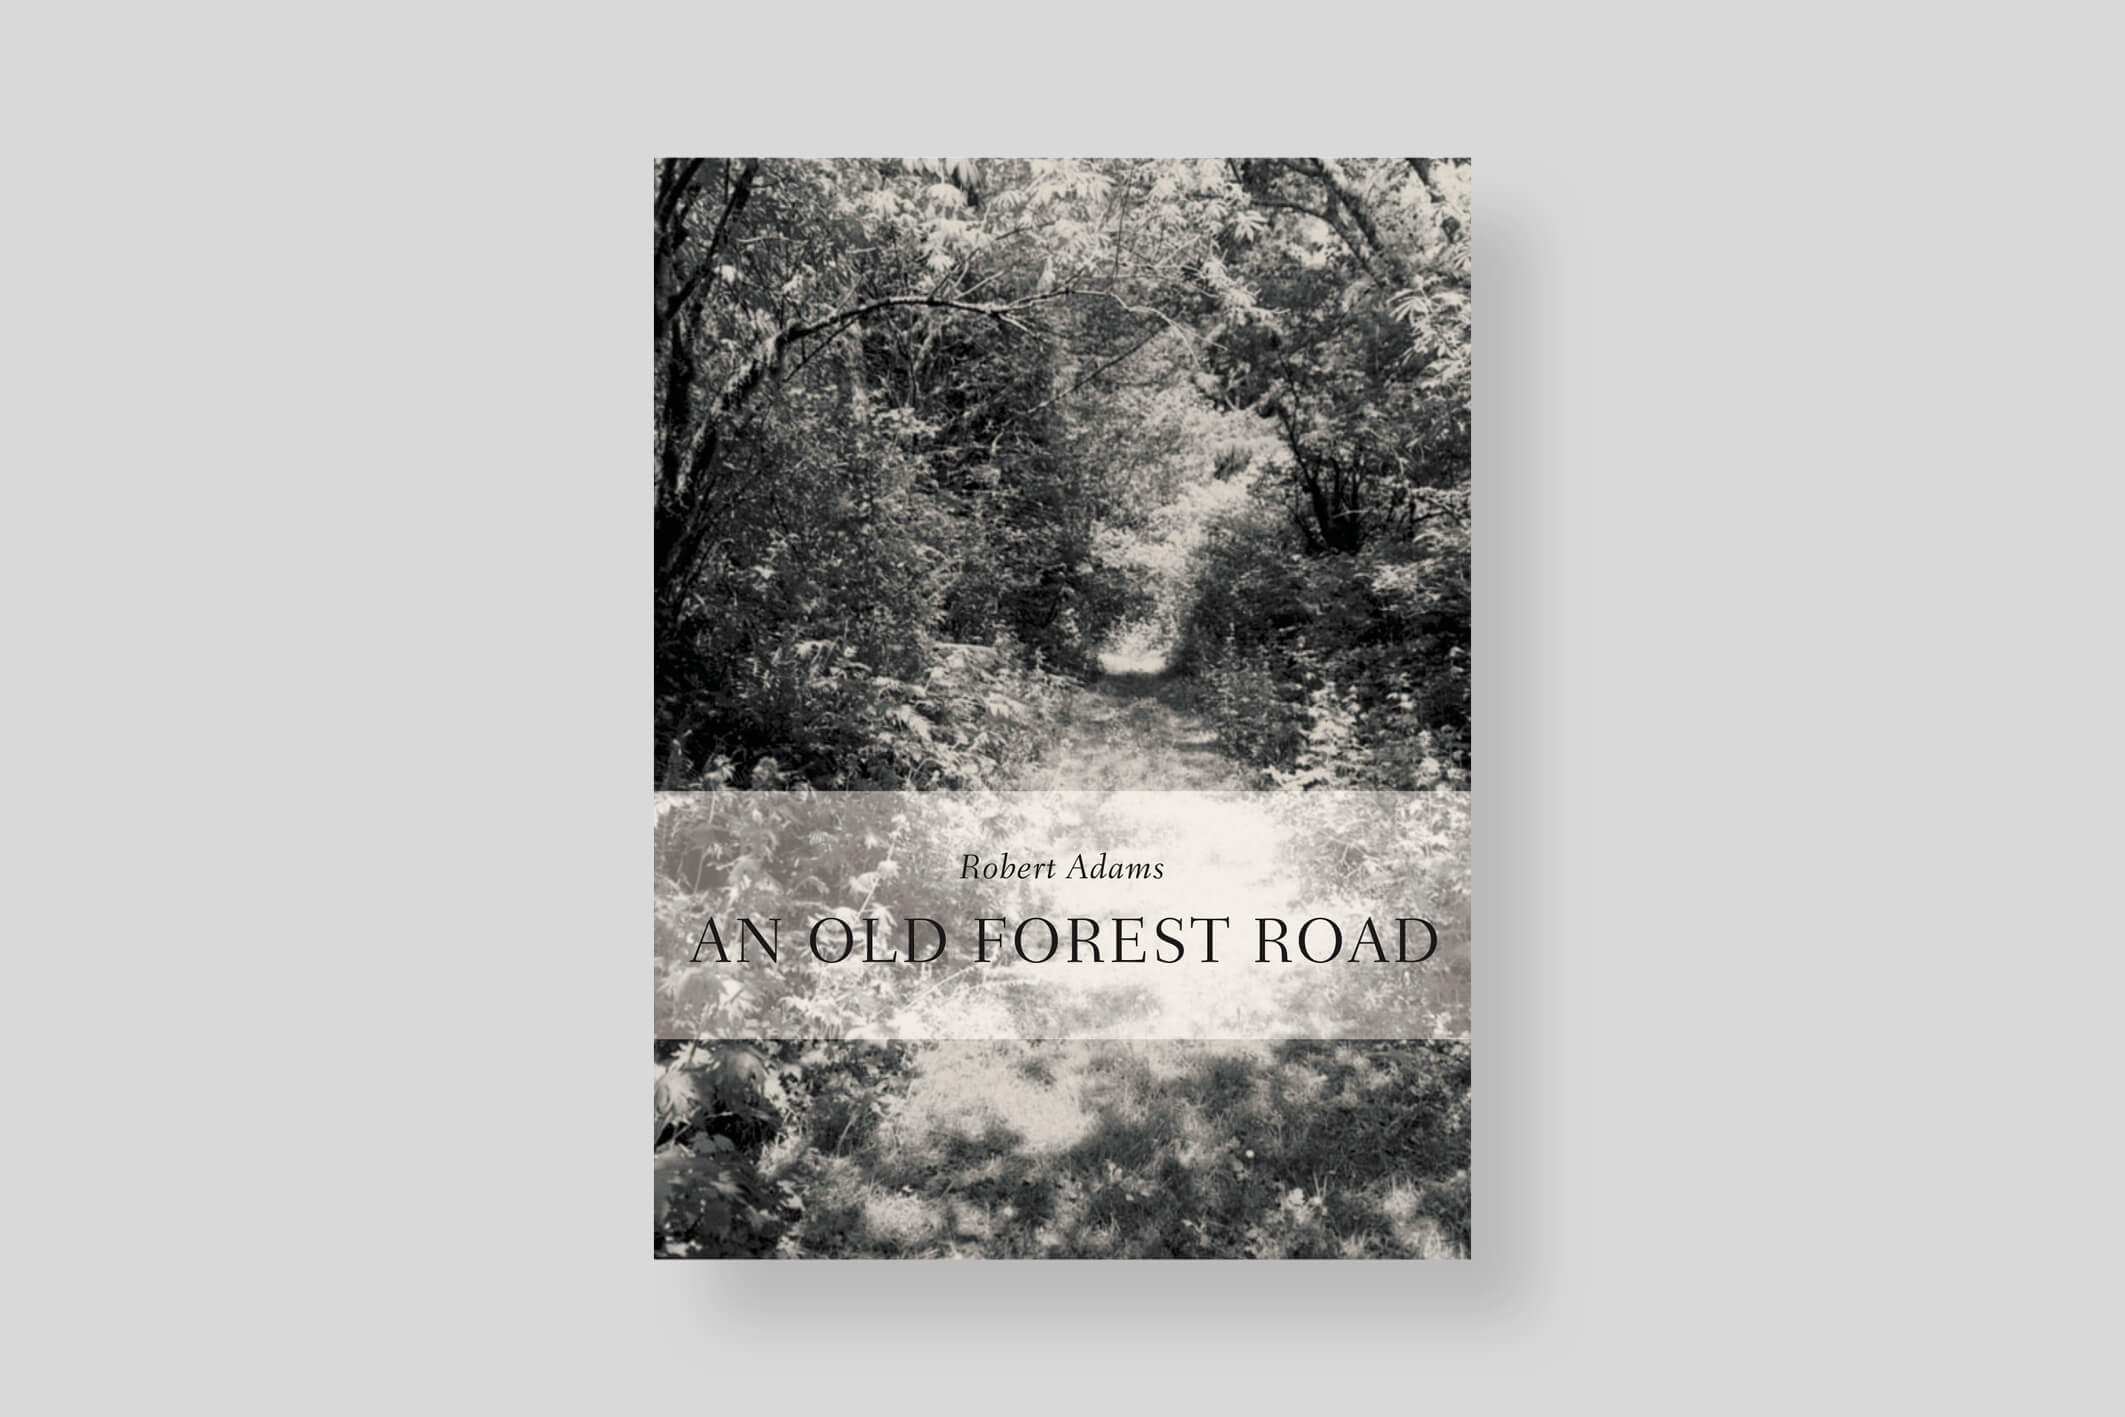 An-old-forest-road_Robert-Adams_Walther-konig_cover